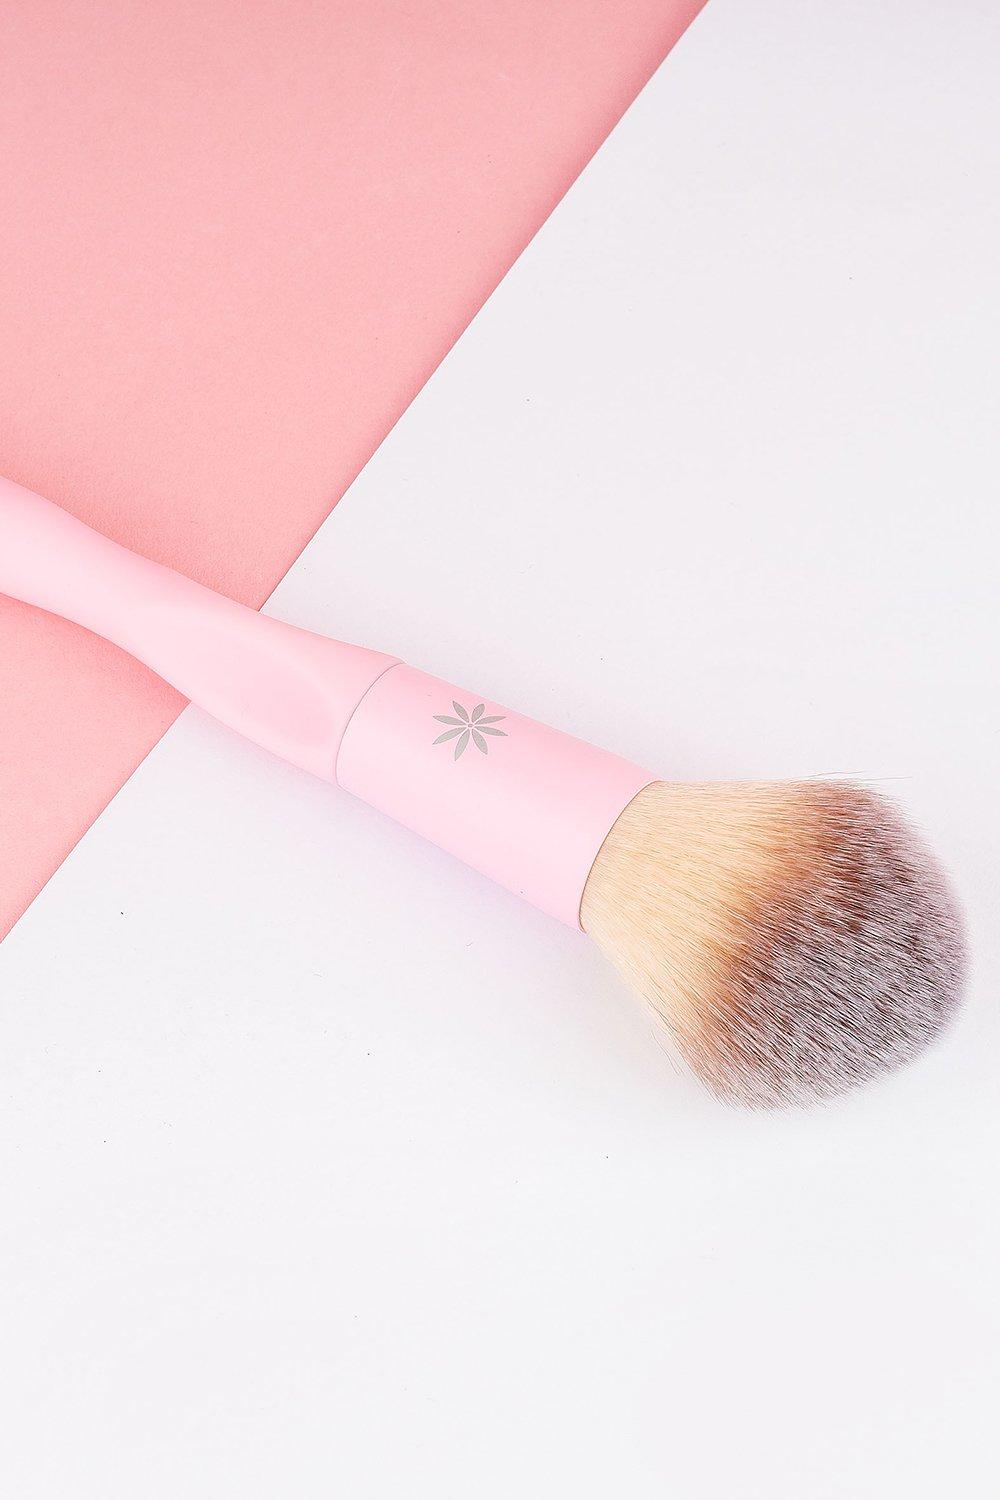 Brushworks Hd Tapered Powder Brush- Pink  - Size: ONE SIZE